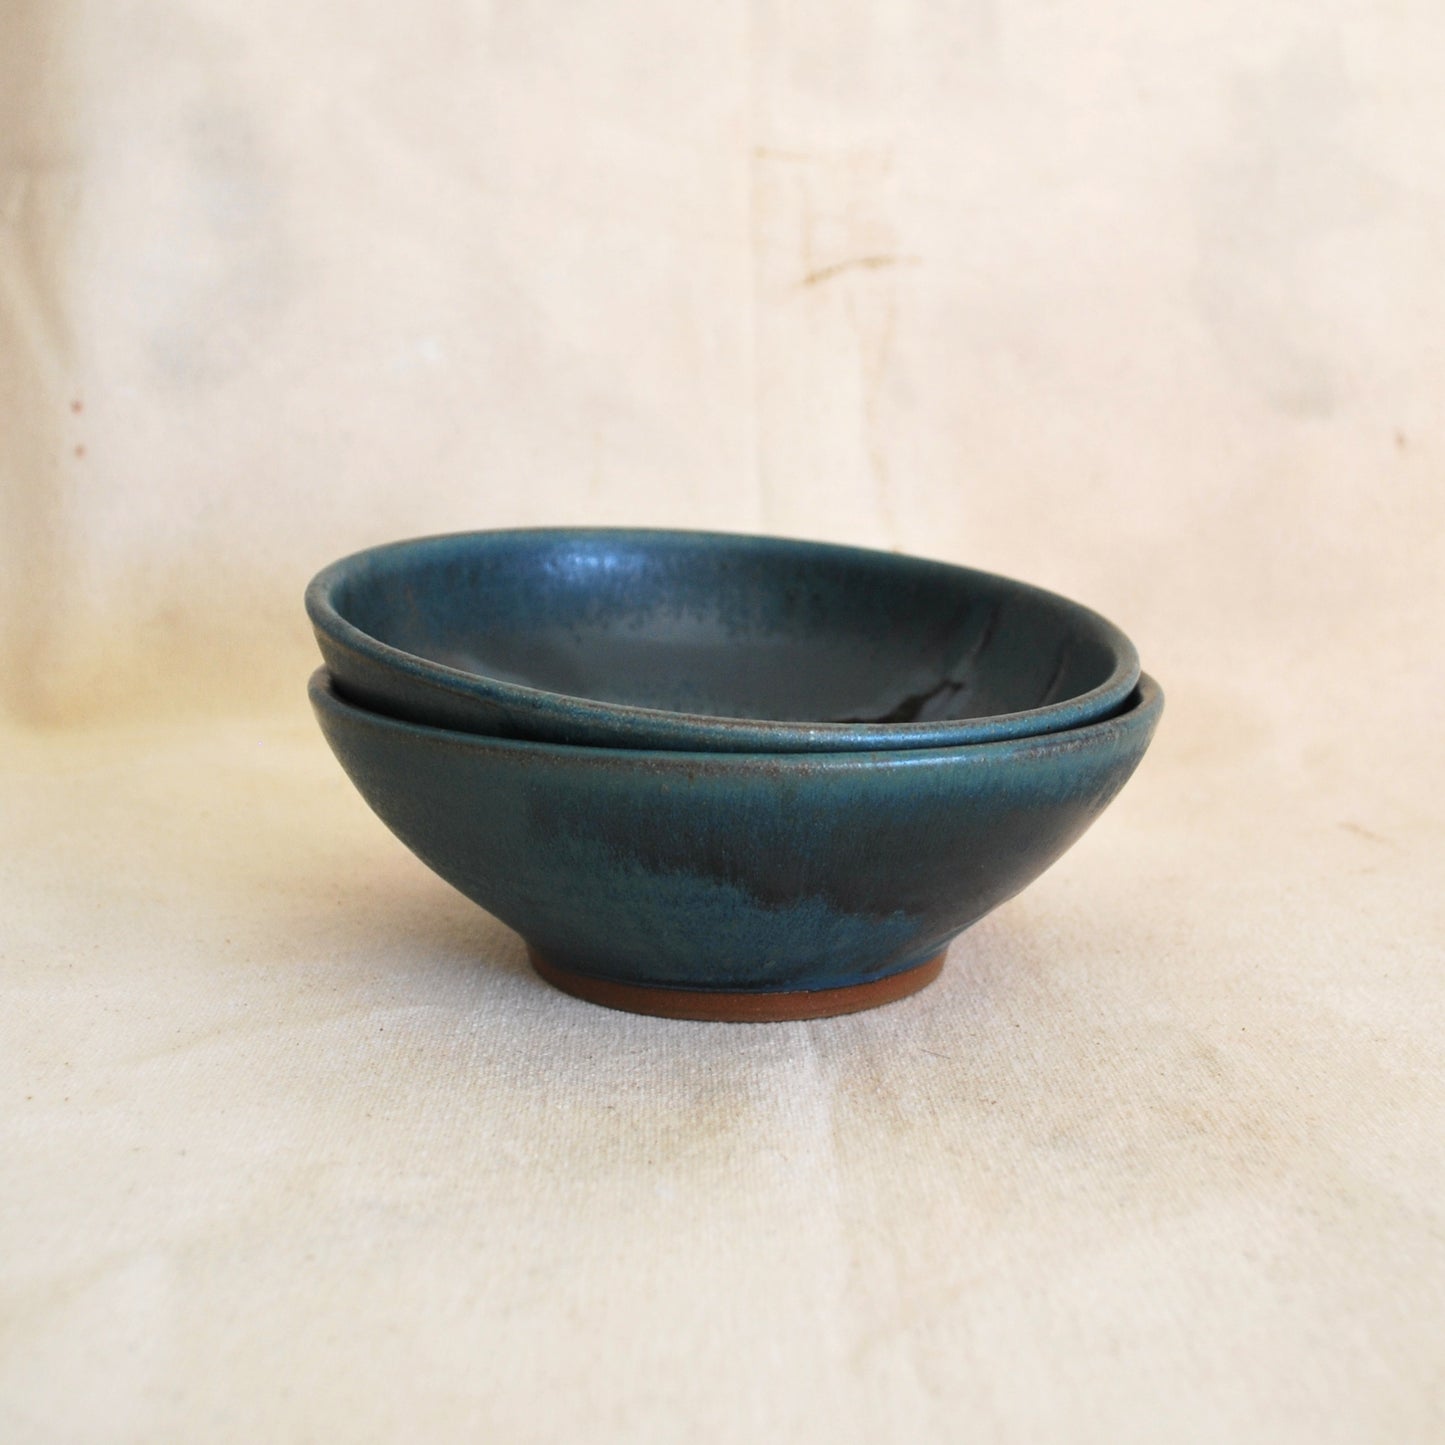 Small Bowl in Teal